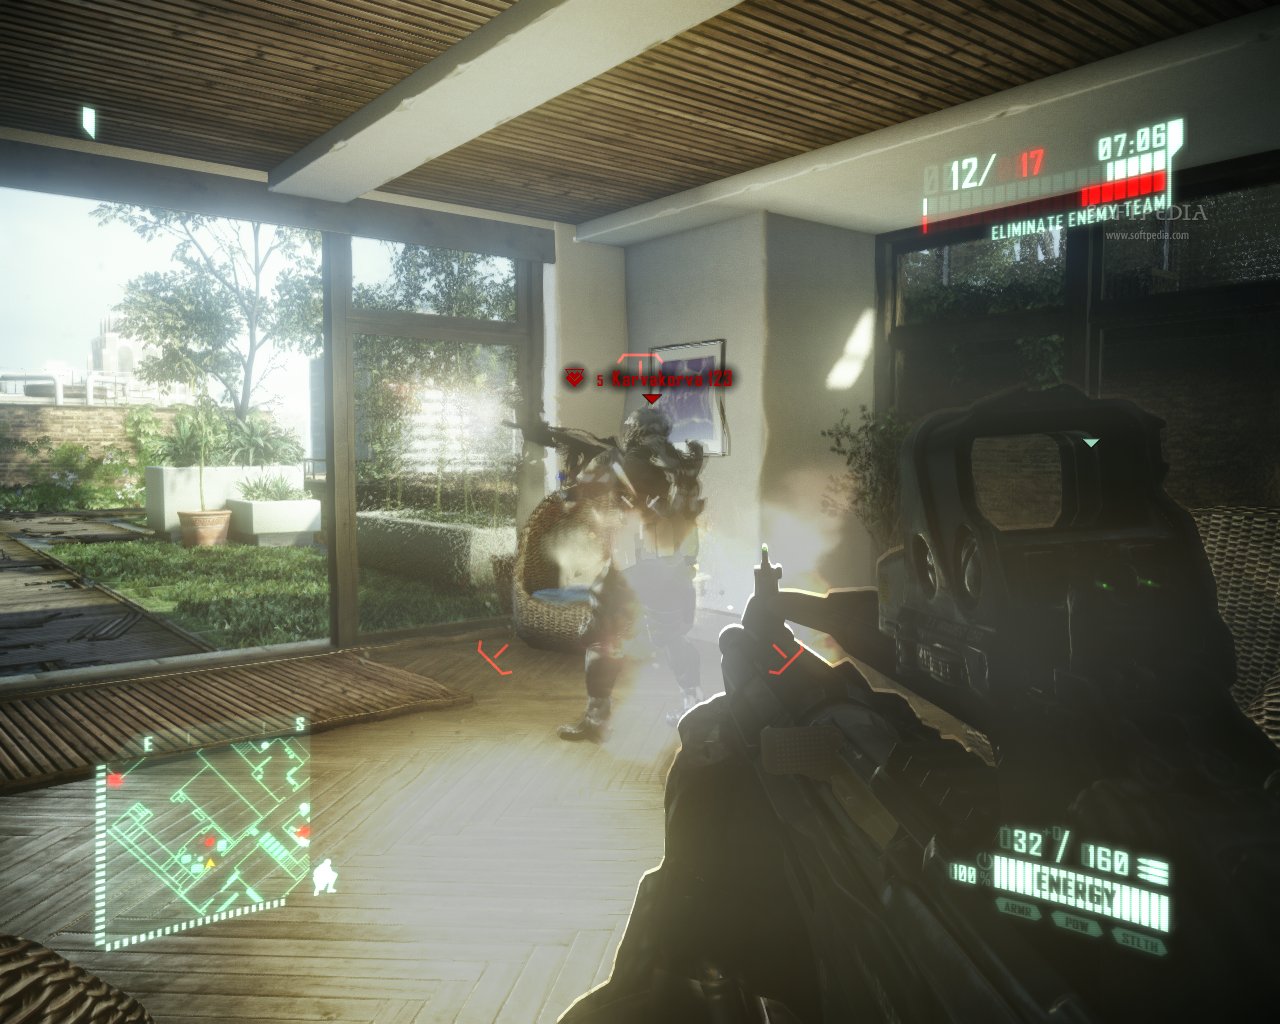 Crysis 2 - High Resolution Textures Patch  Pc